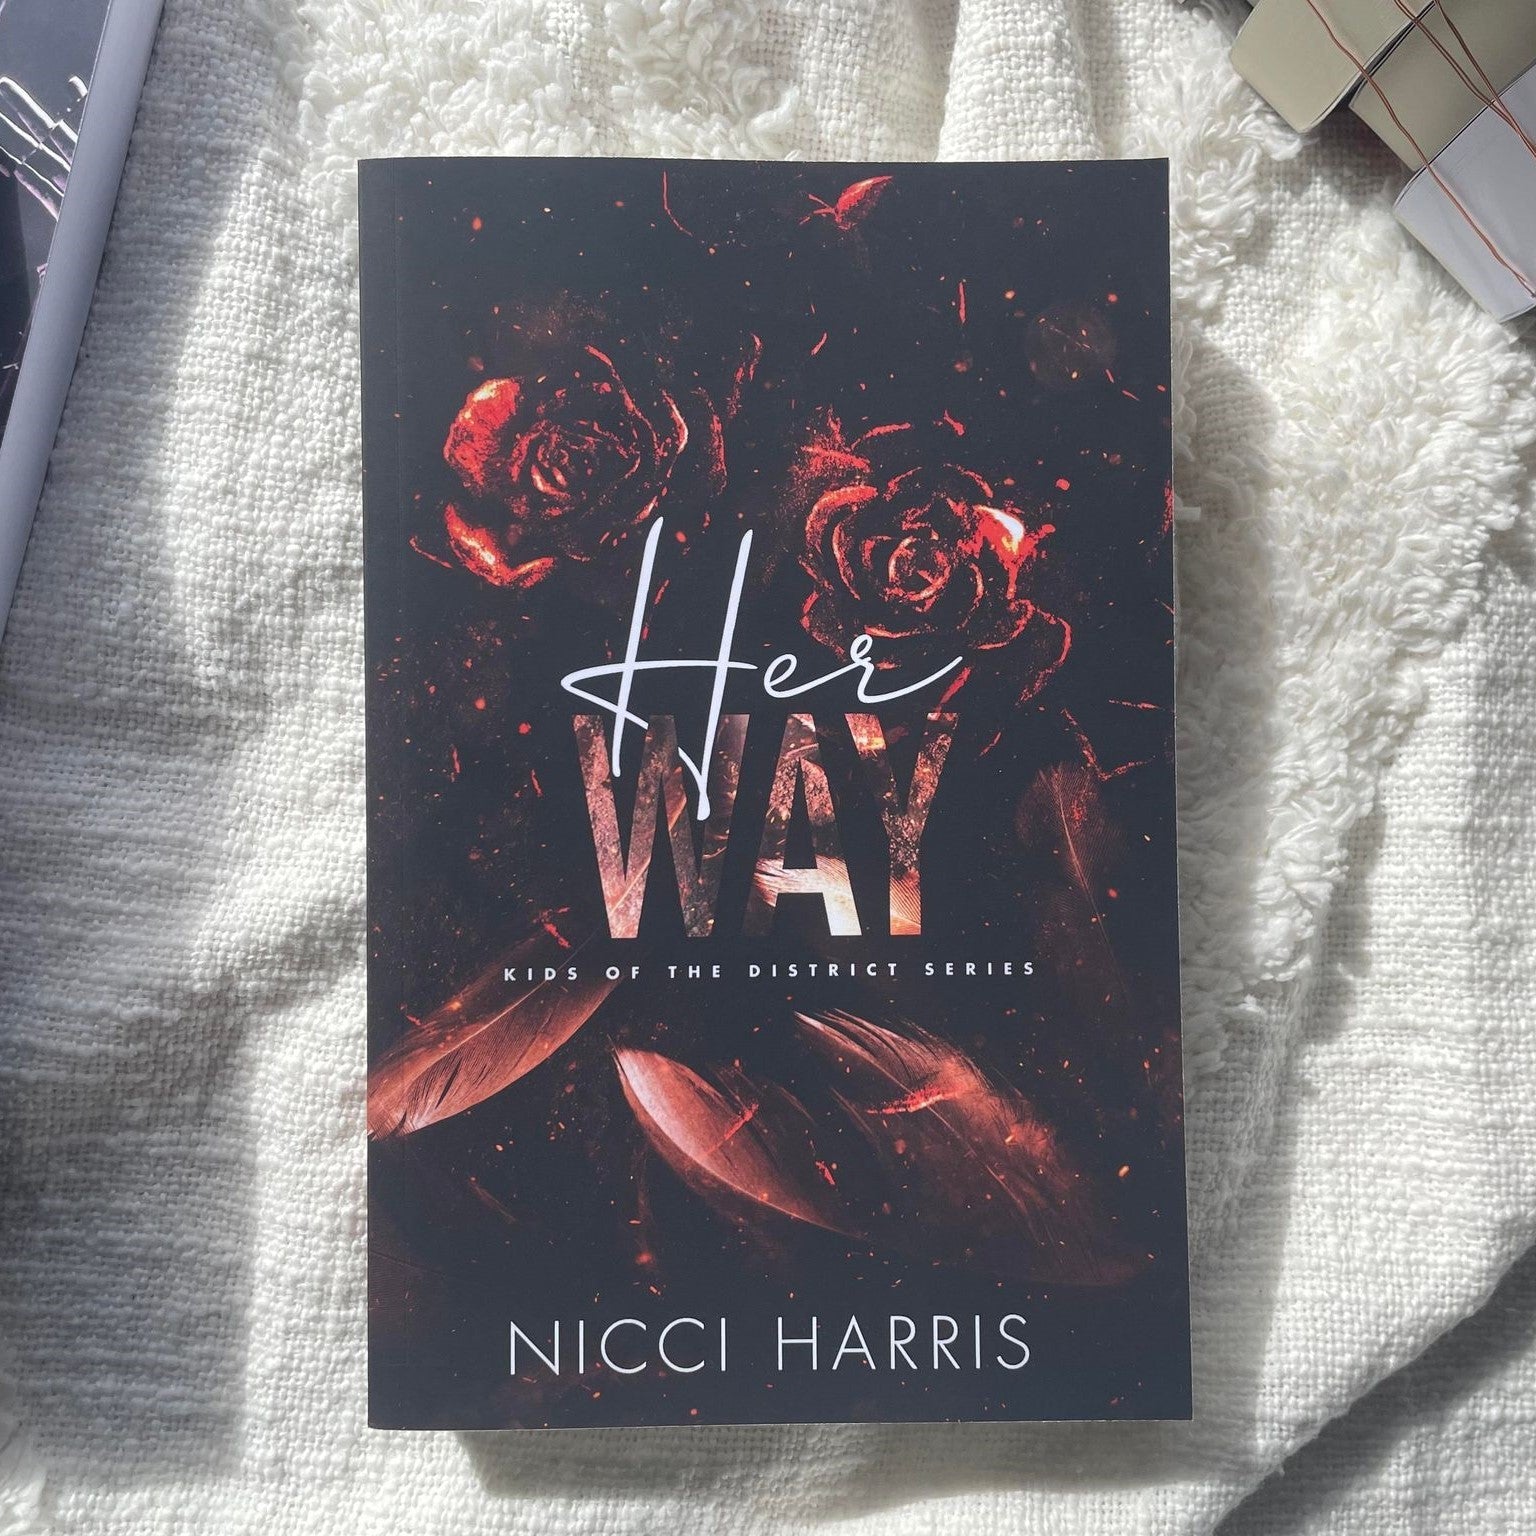 Kids of The District by Nicci Harris